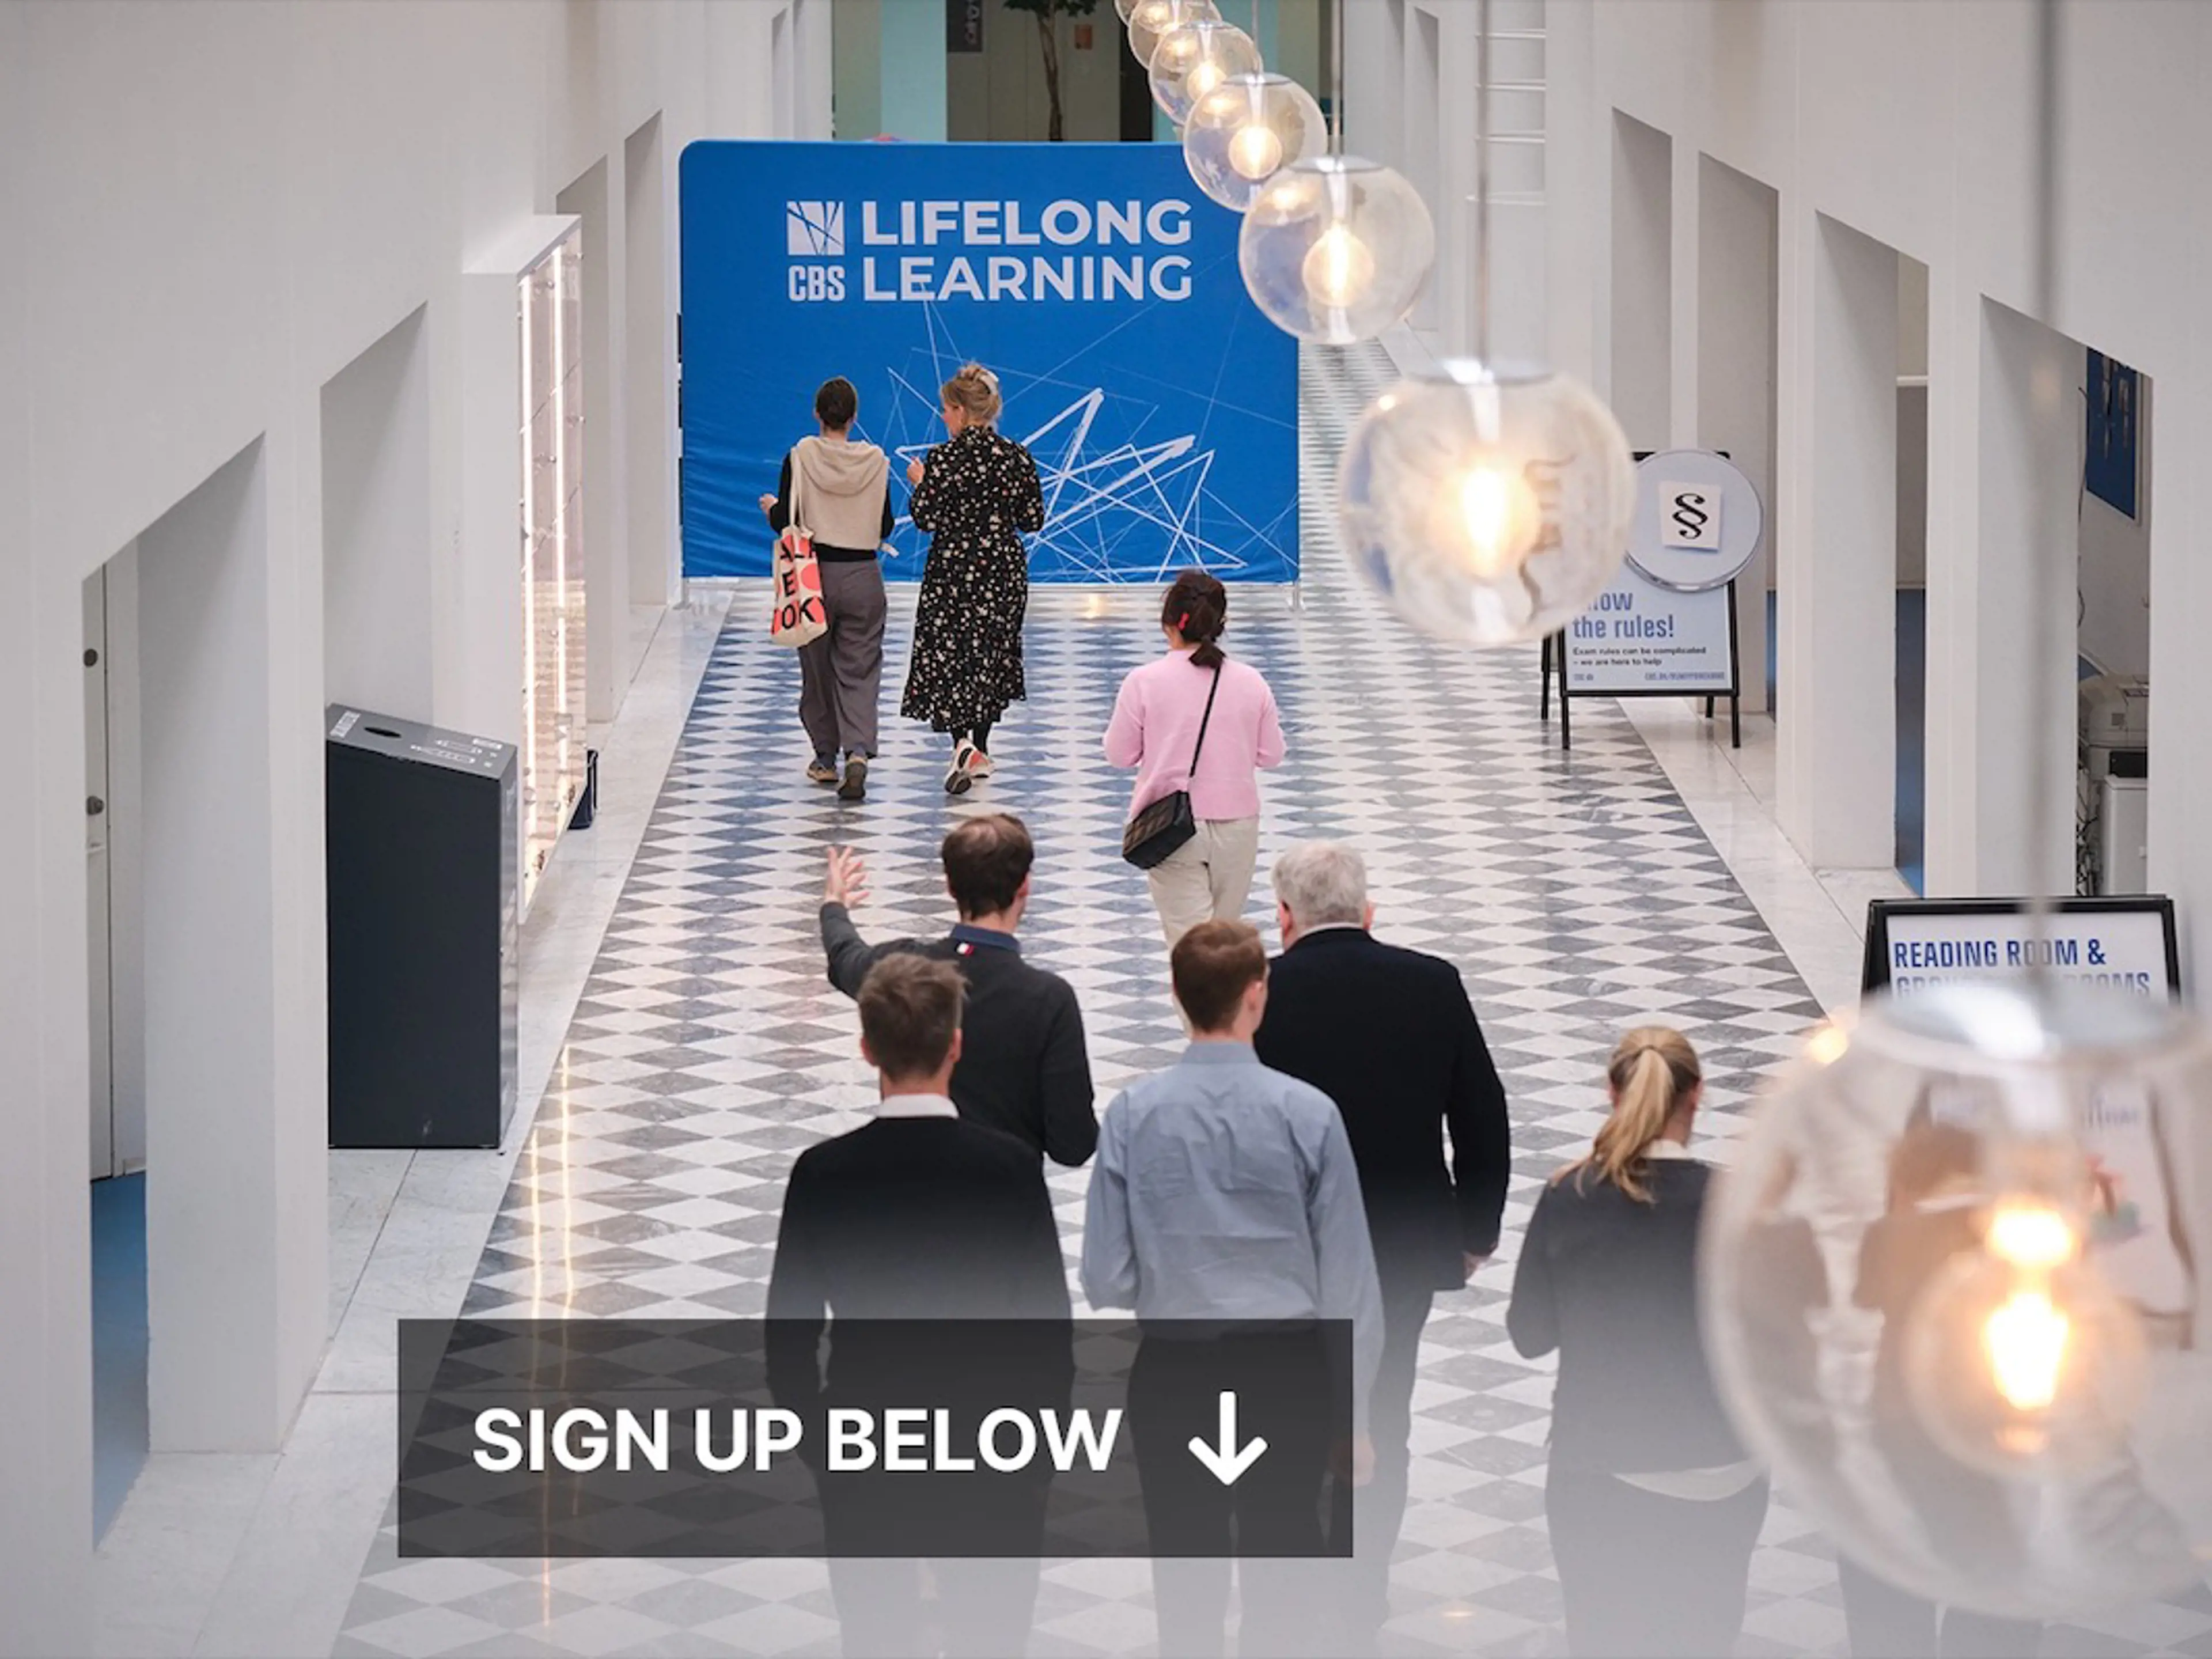 People walking towards a CBS Lifelong Learning sign at Dalgas Have campus, with a label on the picture indicating 'Sign up below'